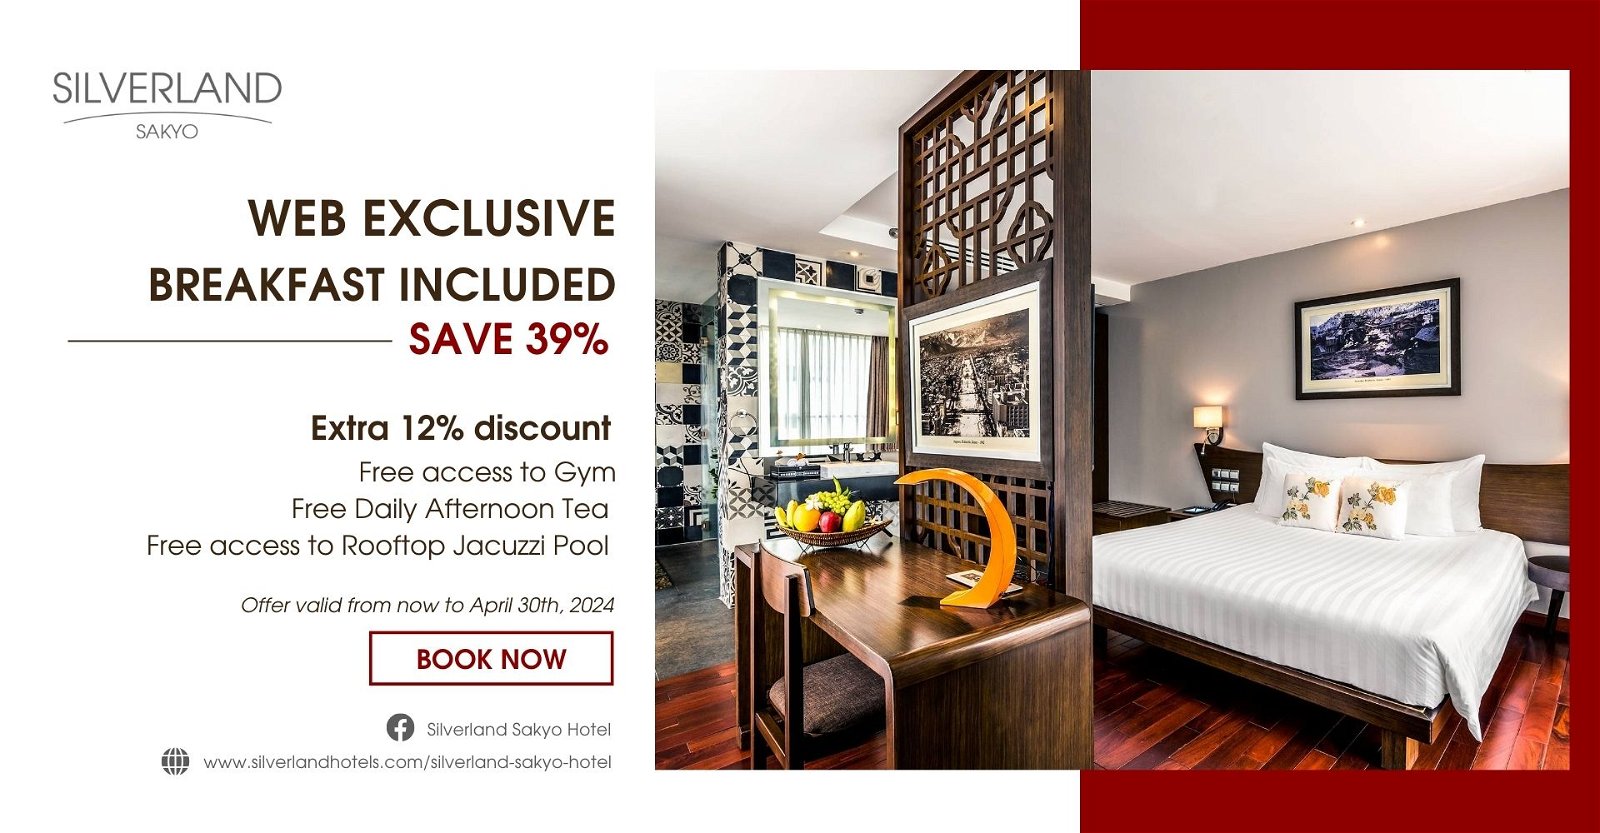 SILVERLAND SAKYO – WEB EXCLUSIVE – BREAKFAST INCLUDED (SAVE 39%)